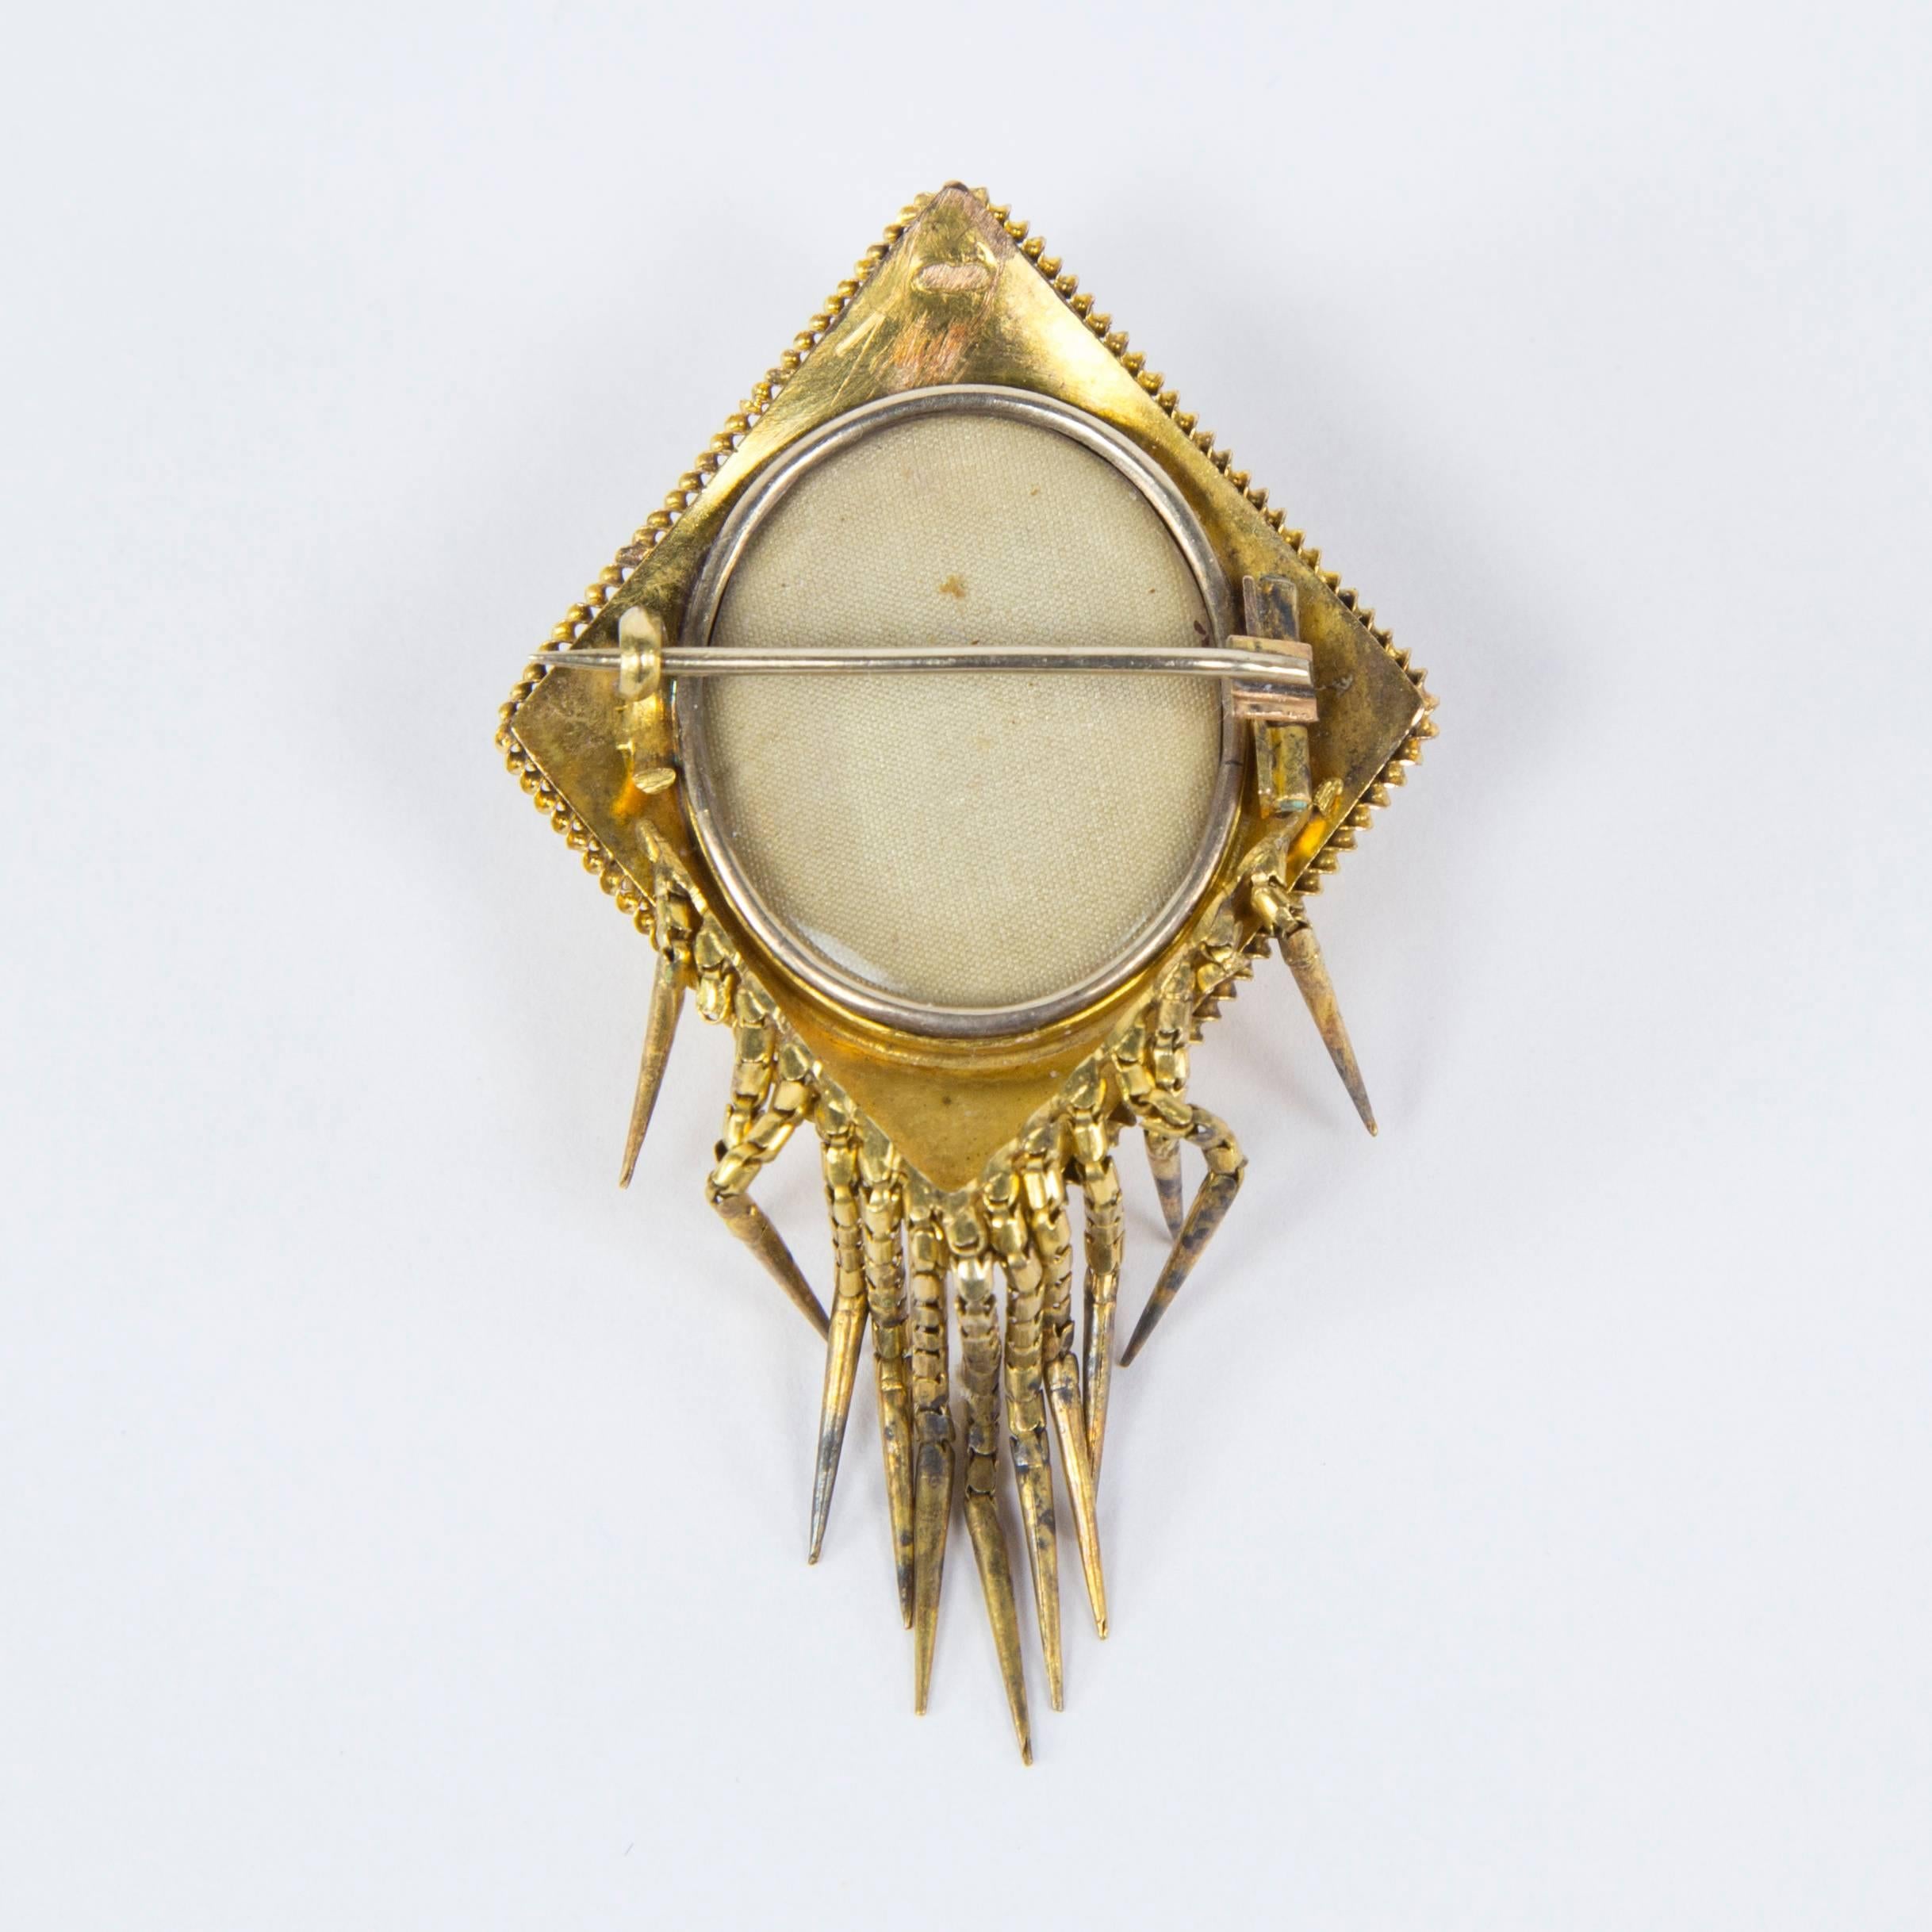 Victorian Diamond shaped Gold Mourning Brooch with hanging articulated gold tassels; beautifully hand crafted in relief; raised center featuring floral leaf designs; the reverse side has a place for a photo; approx. size: 2” x 1.5”. (tests to 14k